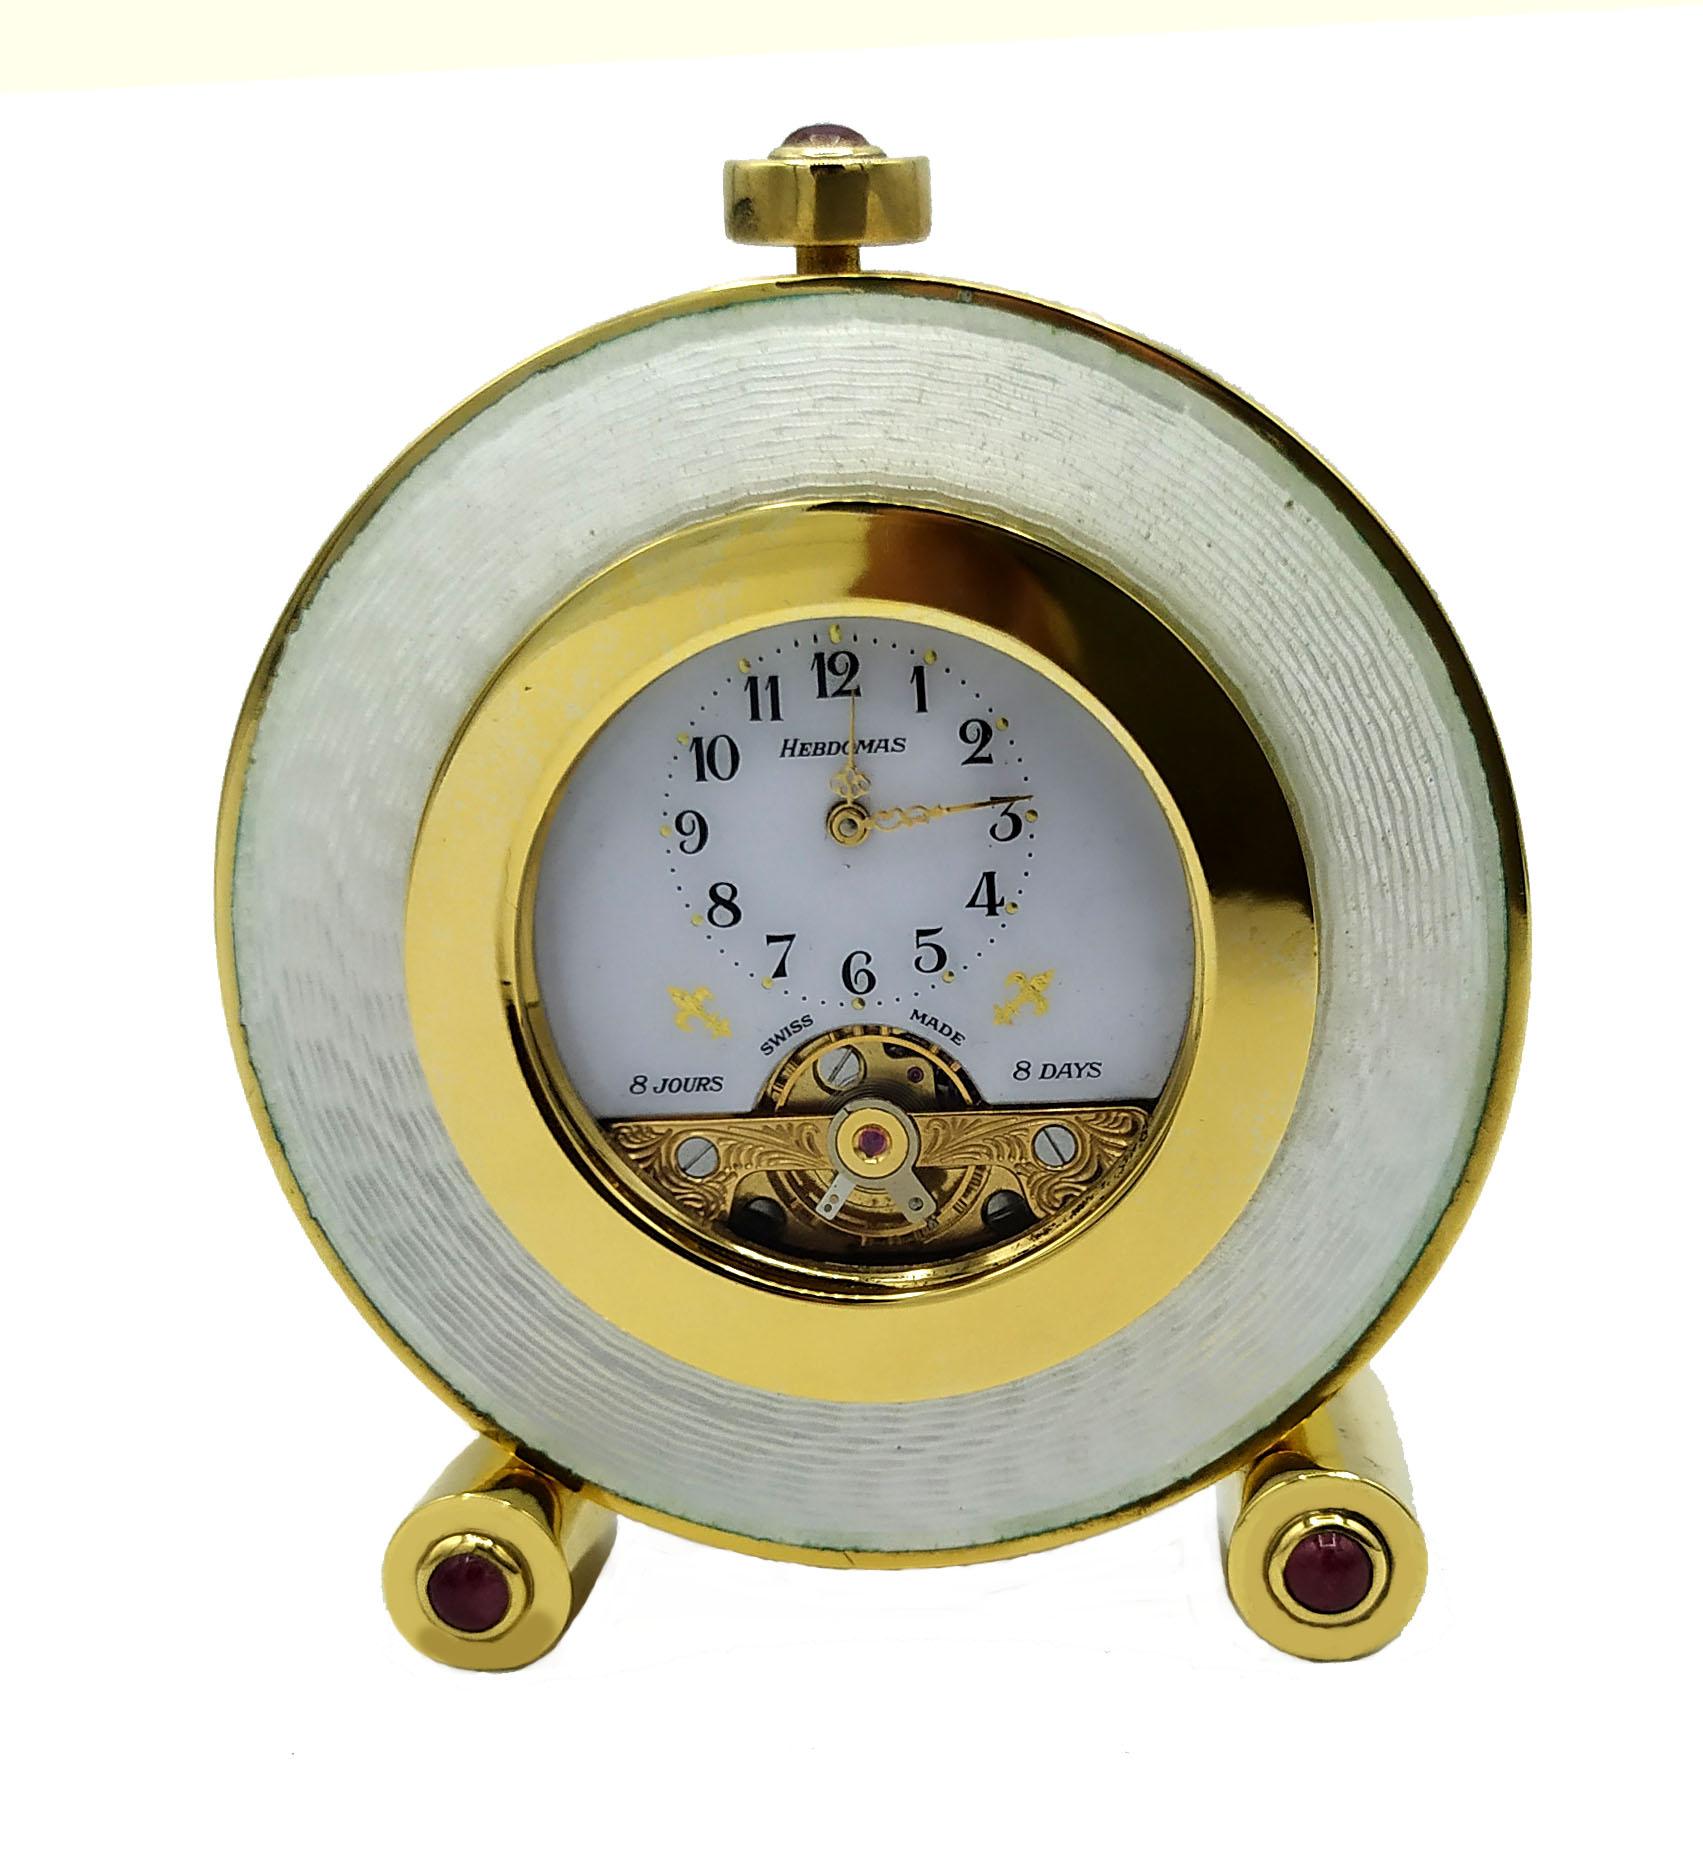 Small round table clock with cylindrical feet in 925/1000 sterling silver gold plated with translucent fired enamel on guillochè with 3 cabochon pink tourmalines diameter mm. 4. “Hebdomas” Swiss mechanical movement with visible balance wheel and